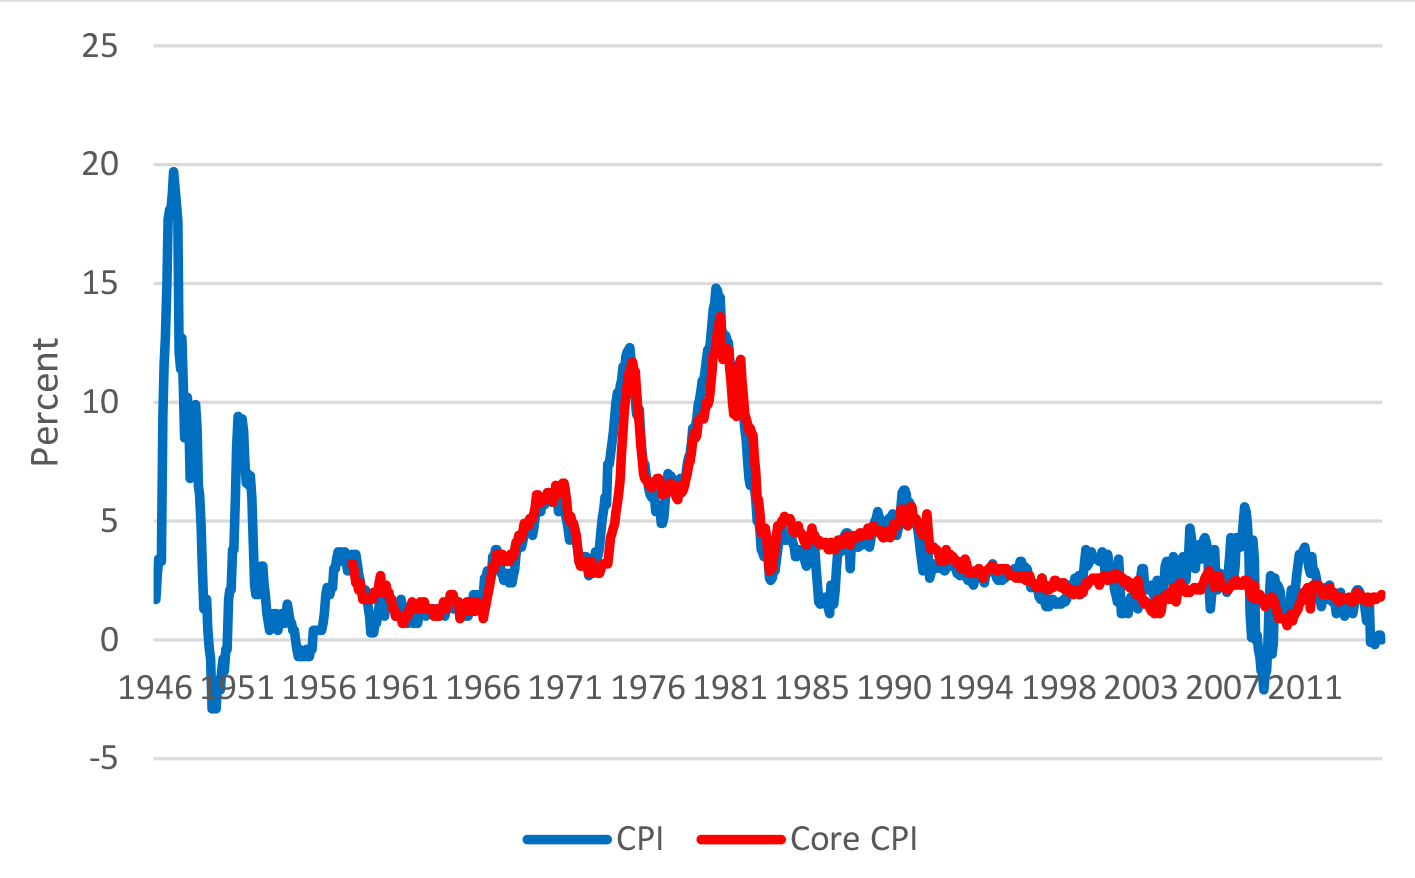 Figure 1: Percent Change in CPI and Core CPI. See accessible link for data.